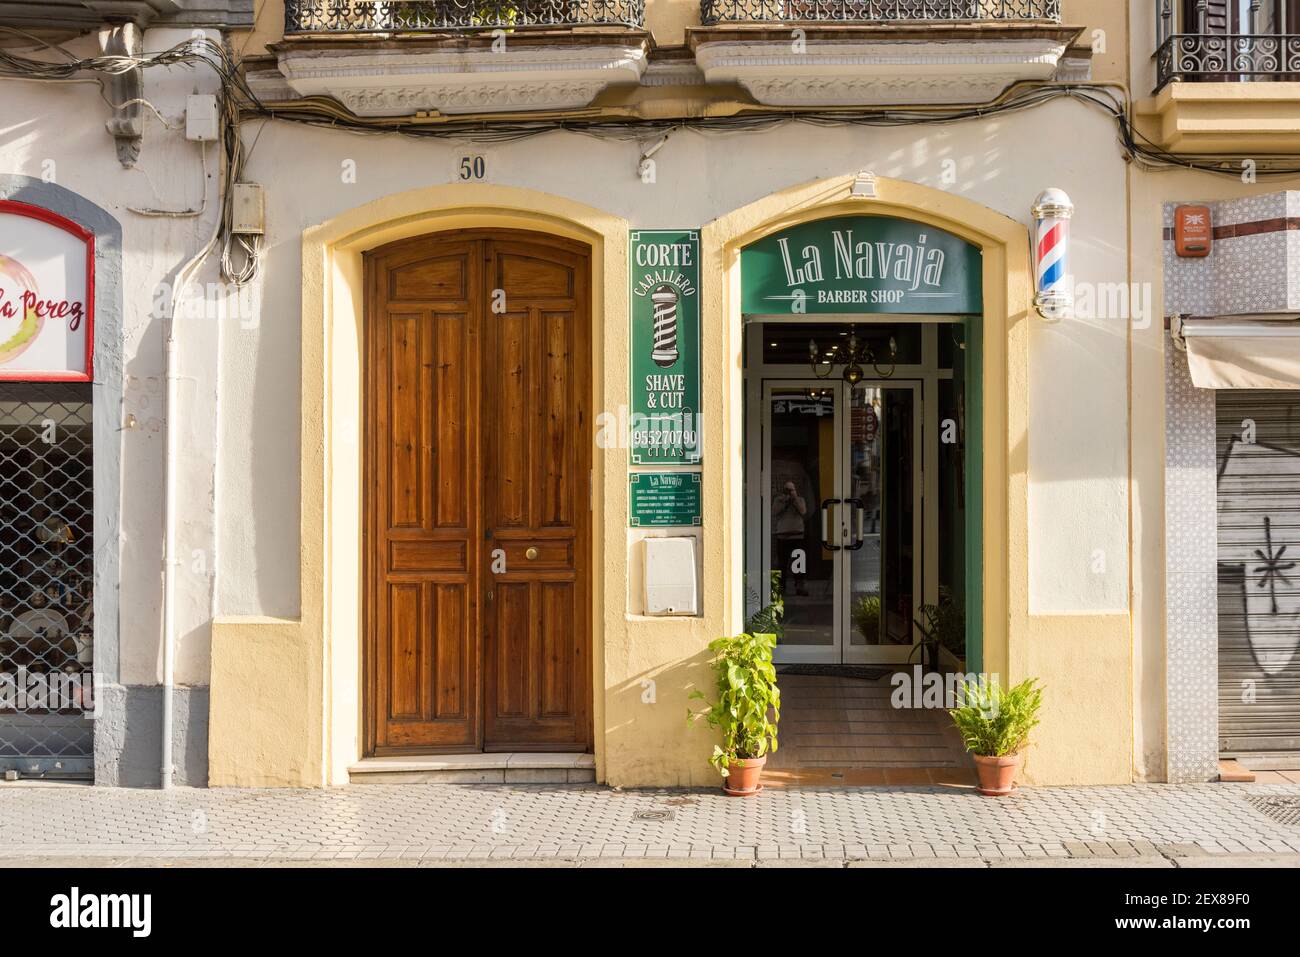 La Navaja Barbers shop and hairdressers in Seville Spain, Stock Photo